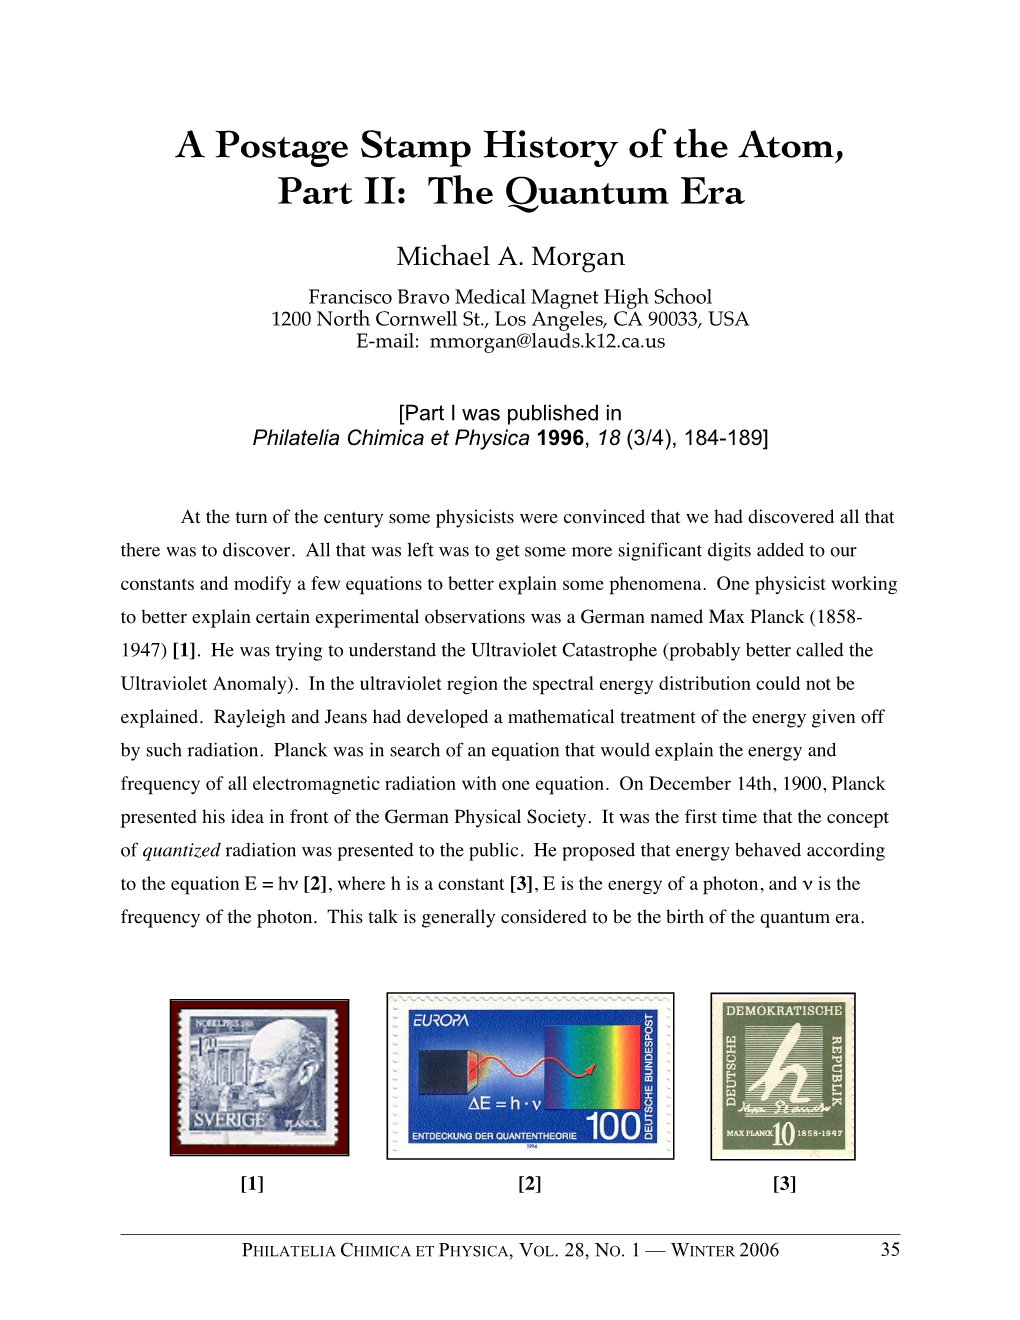 A Postage Stamp History of the Atom, Part II: the Quantum Era